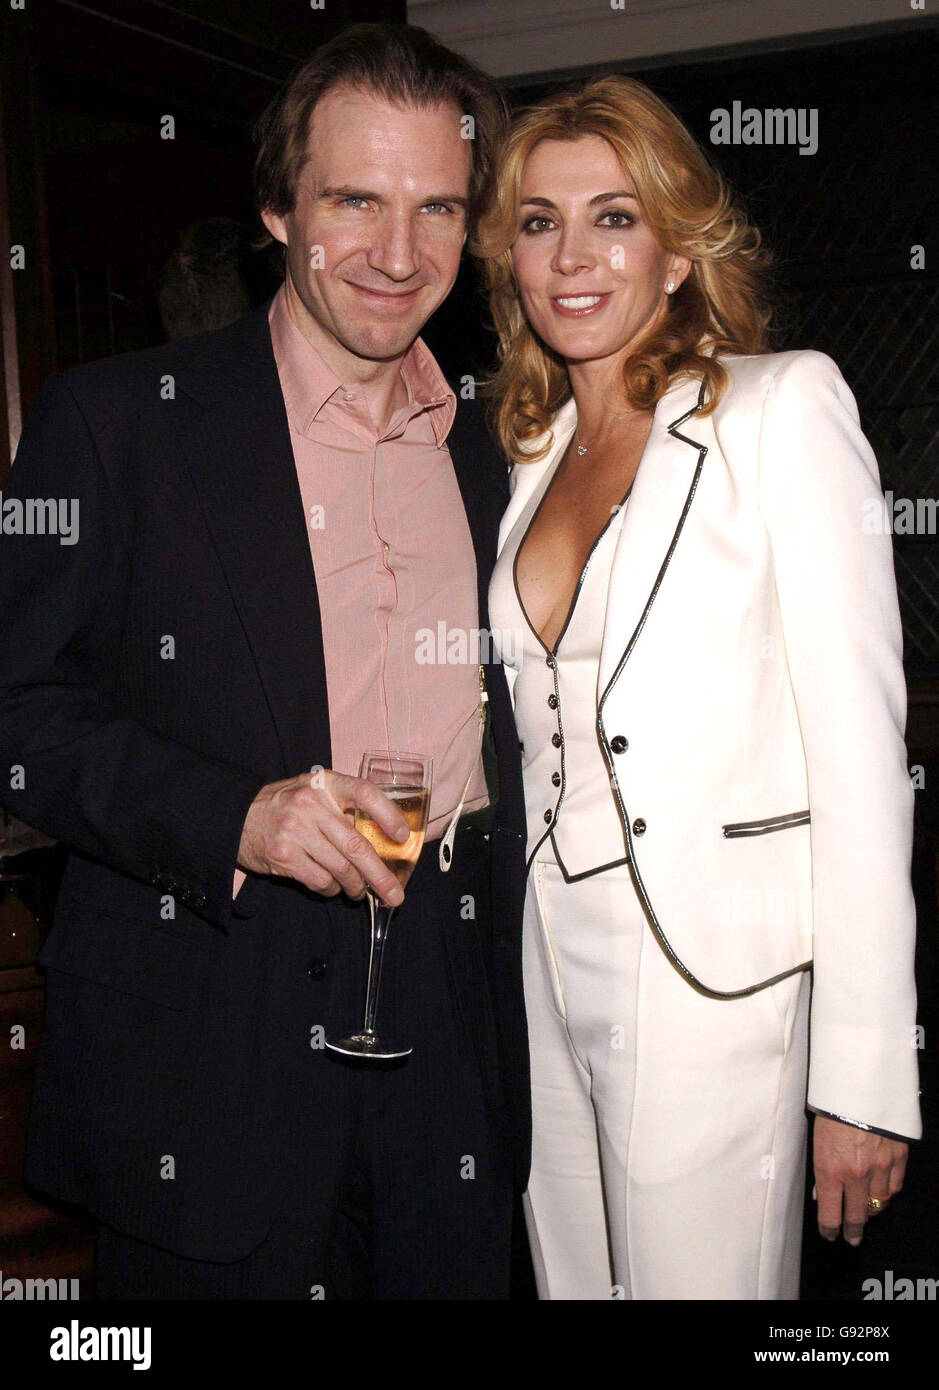 Natasha Richardson and Ralph Fiennes attend the Evening Standard British Film Awards 2005 Dinner, at The Ivy Restaurant, Monday 30 January 2006. The Constant Gardener was awarded Best Film, with Ralph Fiennes winning Best Actor. Natasha Richardson won Best Actress for her performance in Asylum. PRESS ASSOCIATION Photo. Photo credit should read: Yui Mok/PA Stock Photo